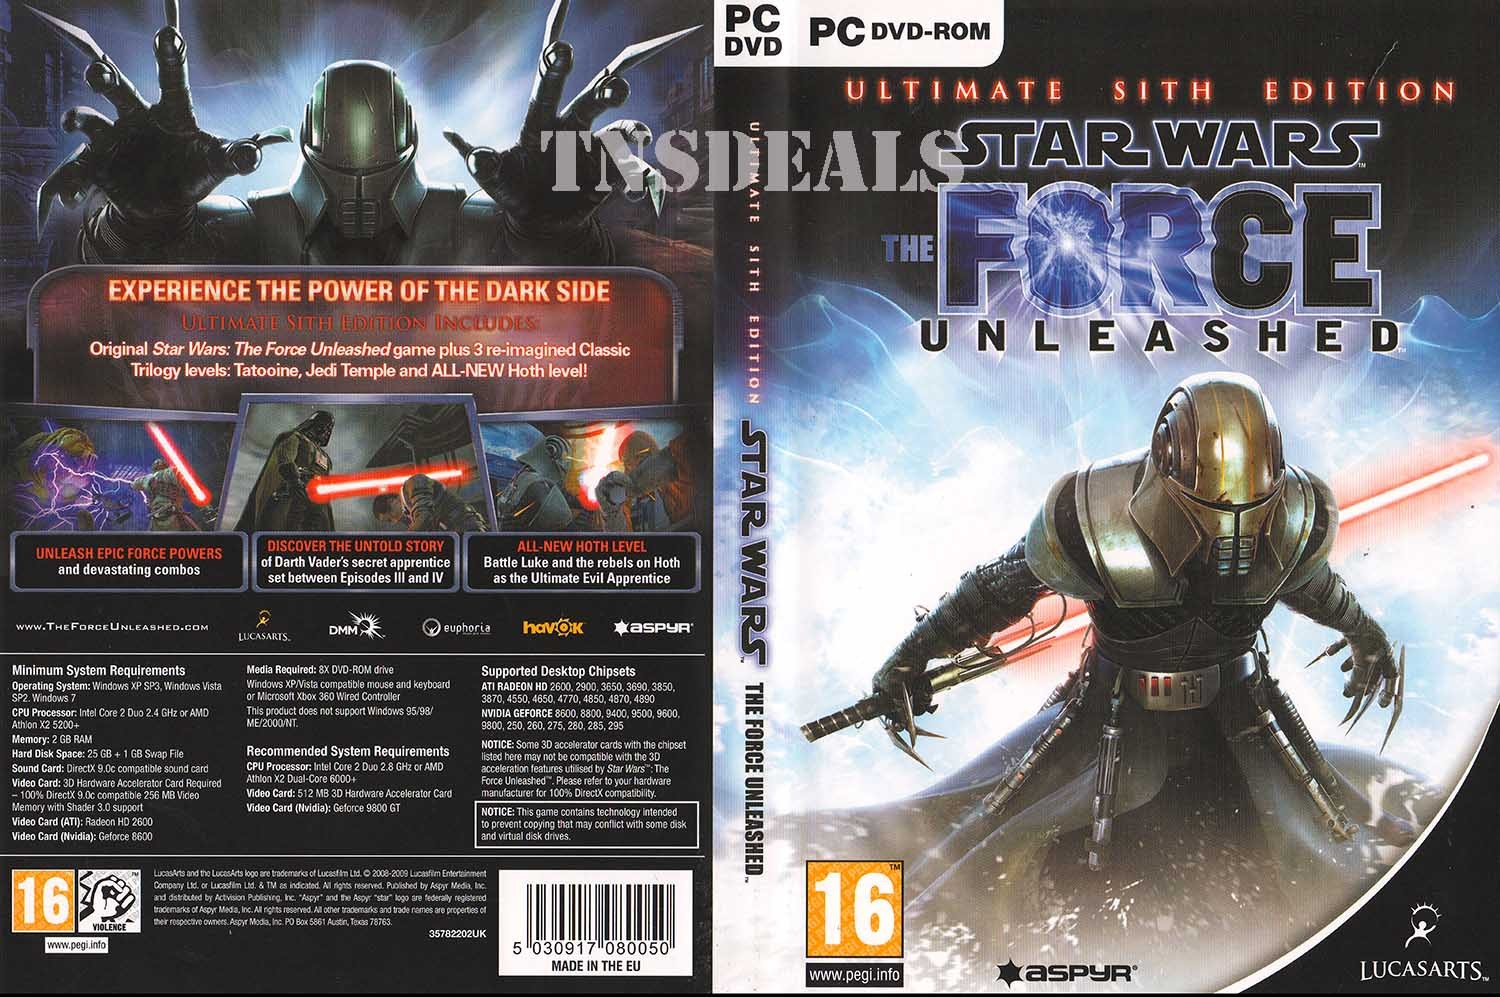 Star wars the force unleashed коды. Star Wars: the Force unleashed - Ultimate Sith Edition.